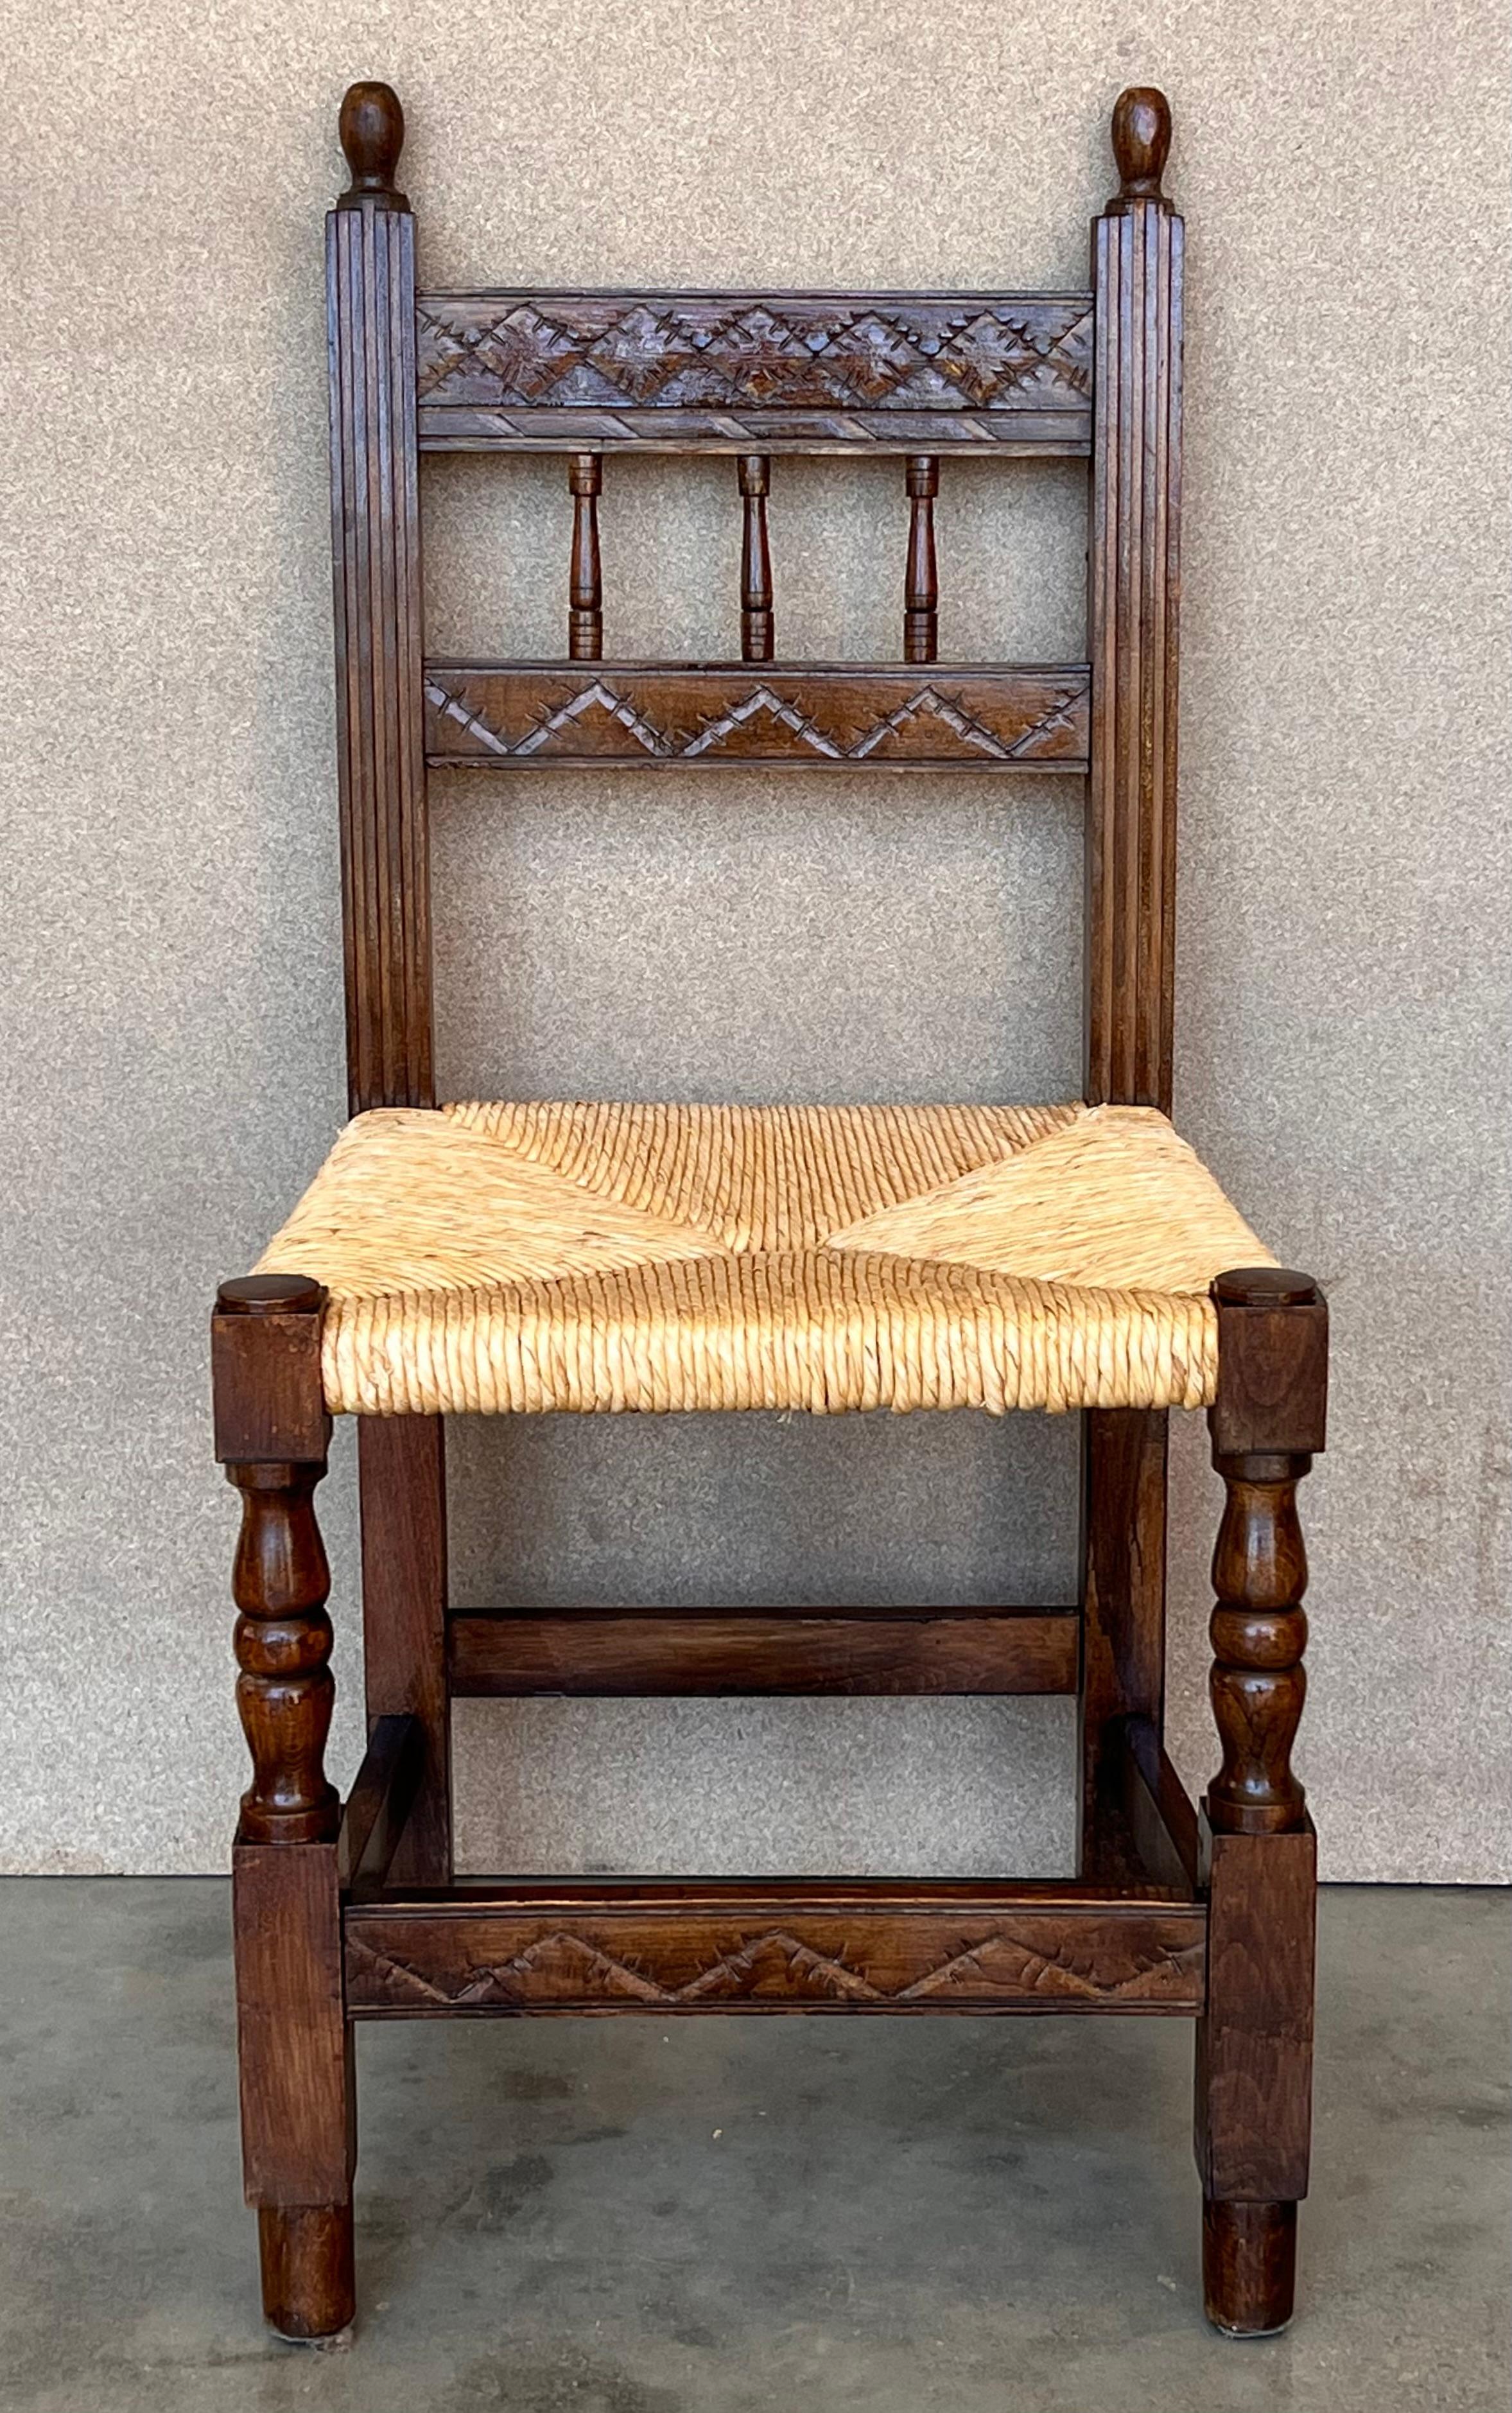 20th century set of six Catalan chairs in carved walnut and caned seats.
Country chairs.